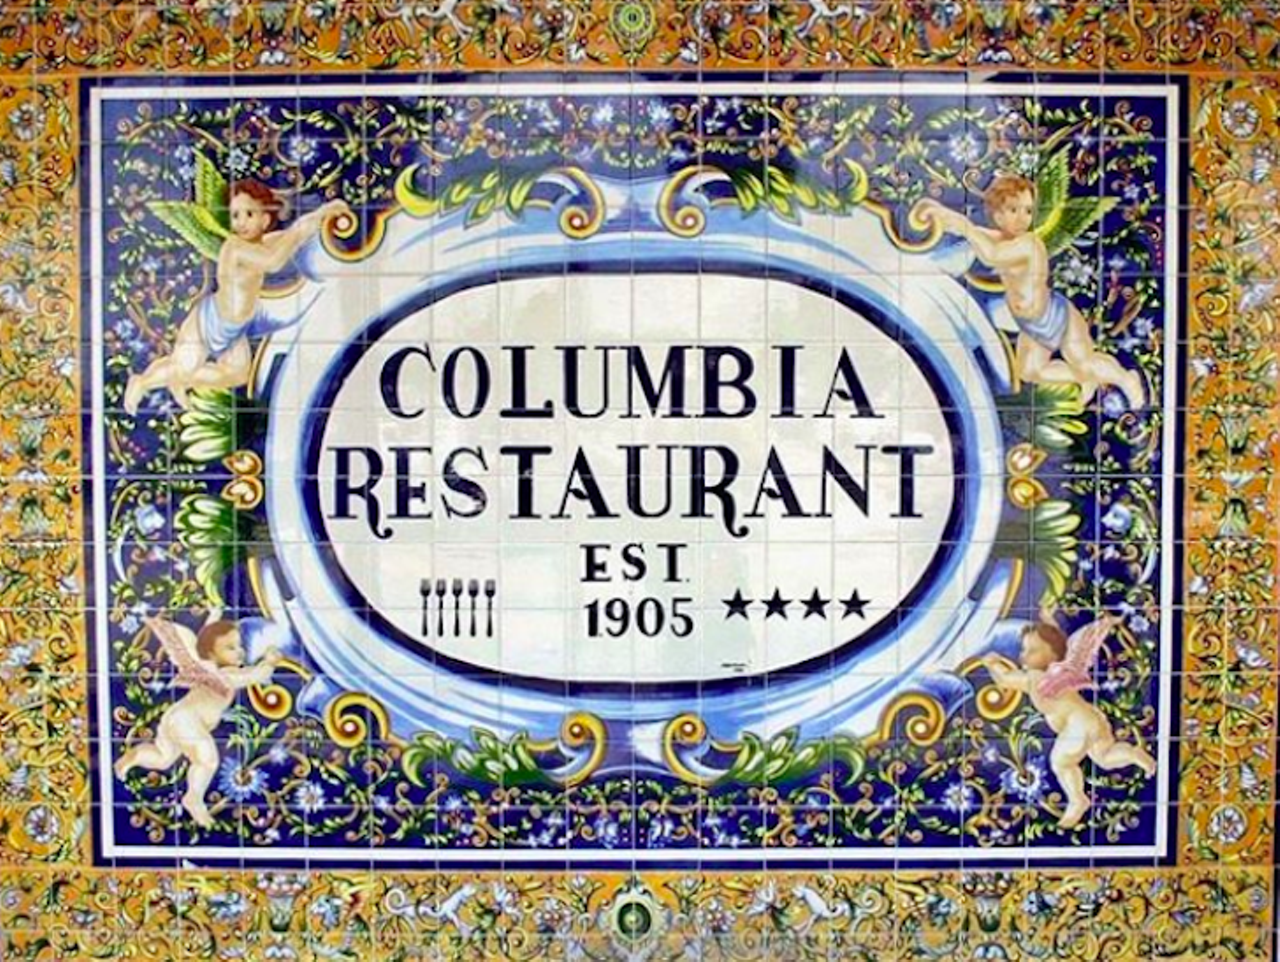 Columbia Restaurant  
2025 E. 7th Avenue tampa 813- 248-3000
Tampa Bay&#146;s OG restaurant. Rich in culture and cuisine, you can catch live performances by bands and flamenco dancers. Without a doubt, you can&#146;t miss this.
Photo via Columbia Columbia/Instagram